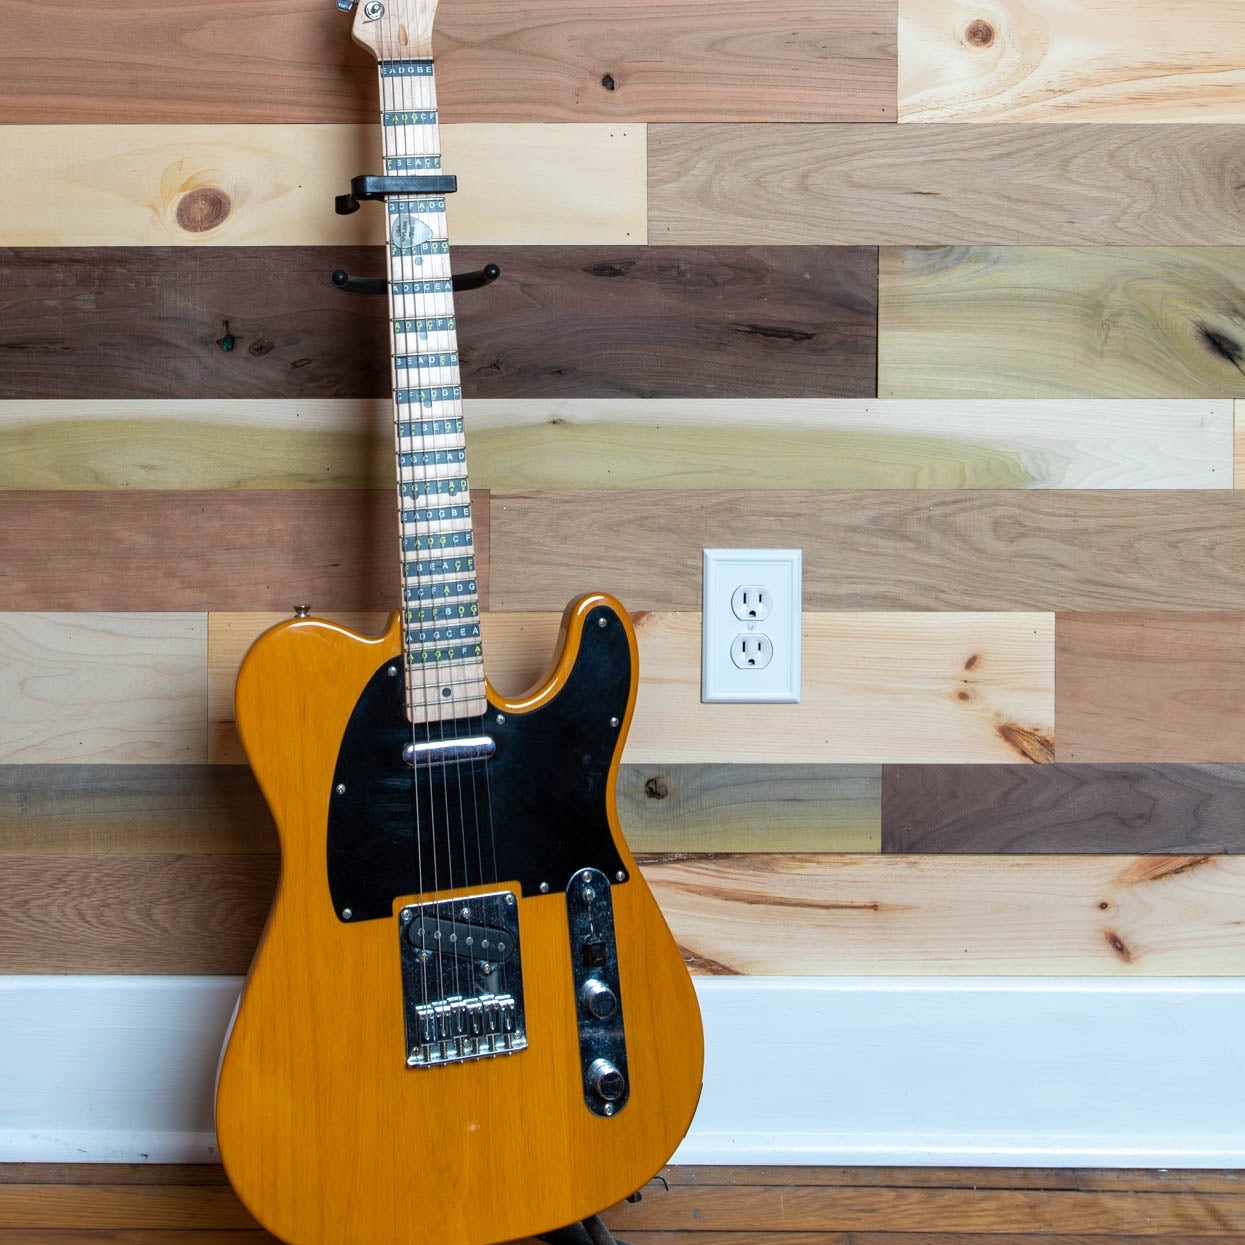 Vintage multicolored reclaimed wooden plank wall with a guitar leaning aganist it.